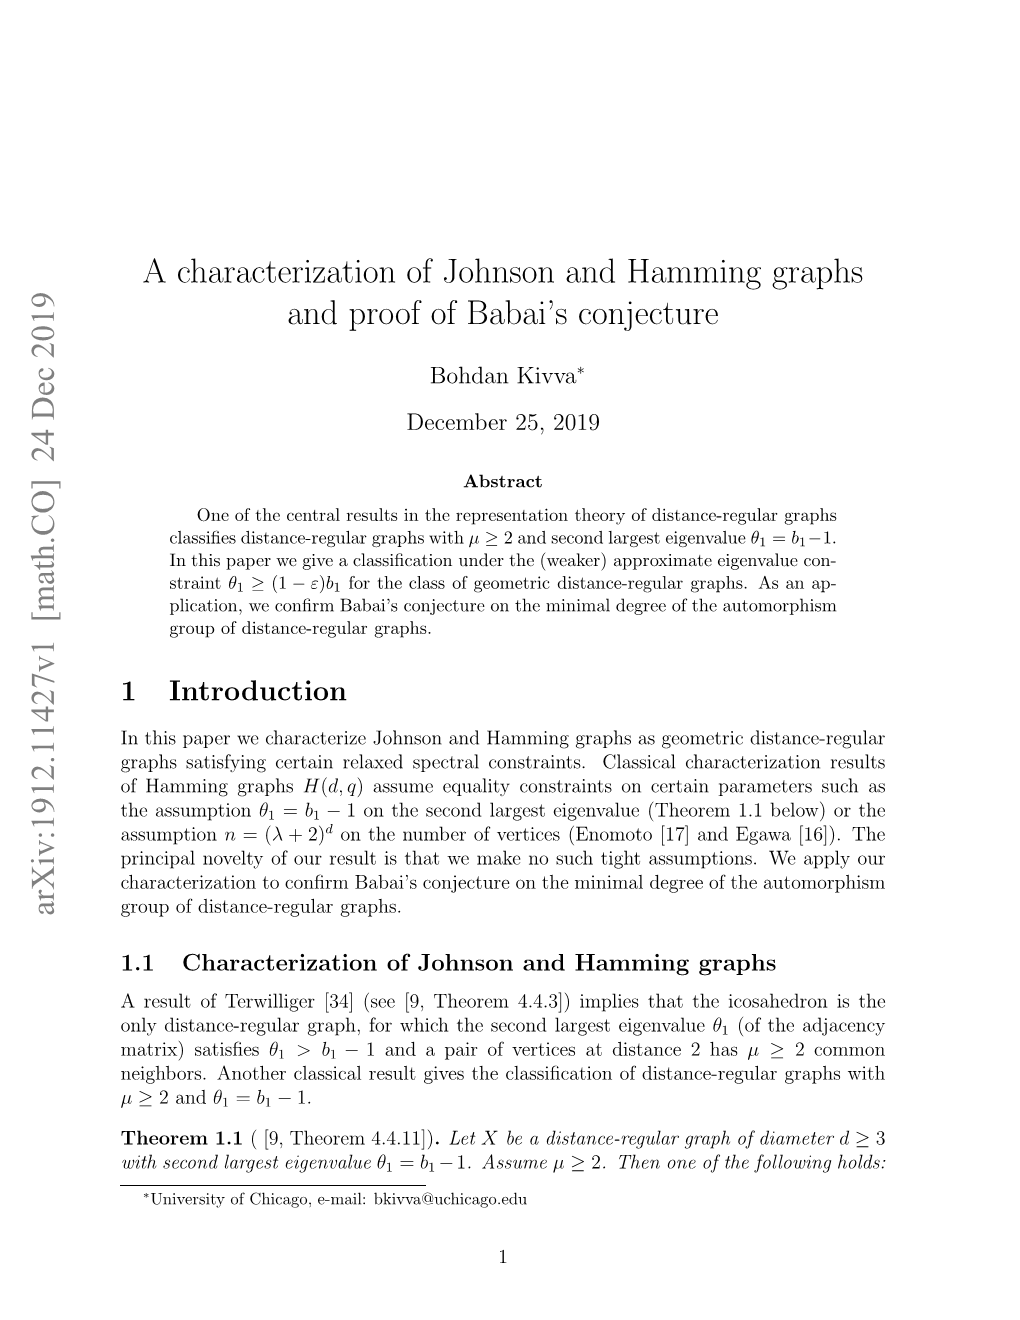 A Characterization of Johnson and Hamming Graphs and Proof of Babai's Conjecture